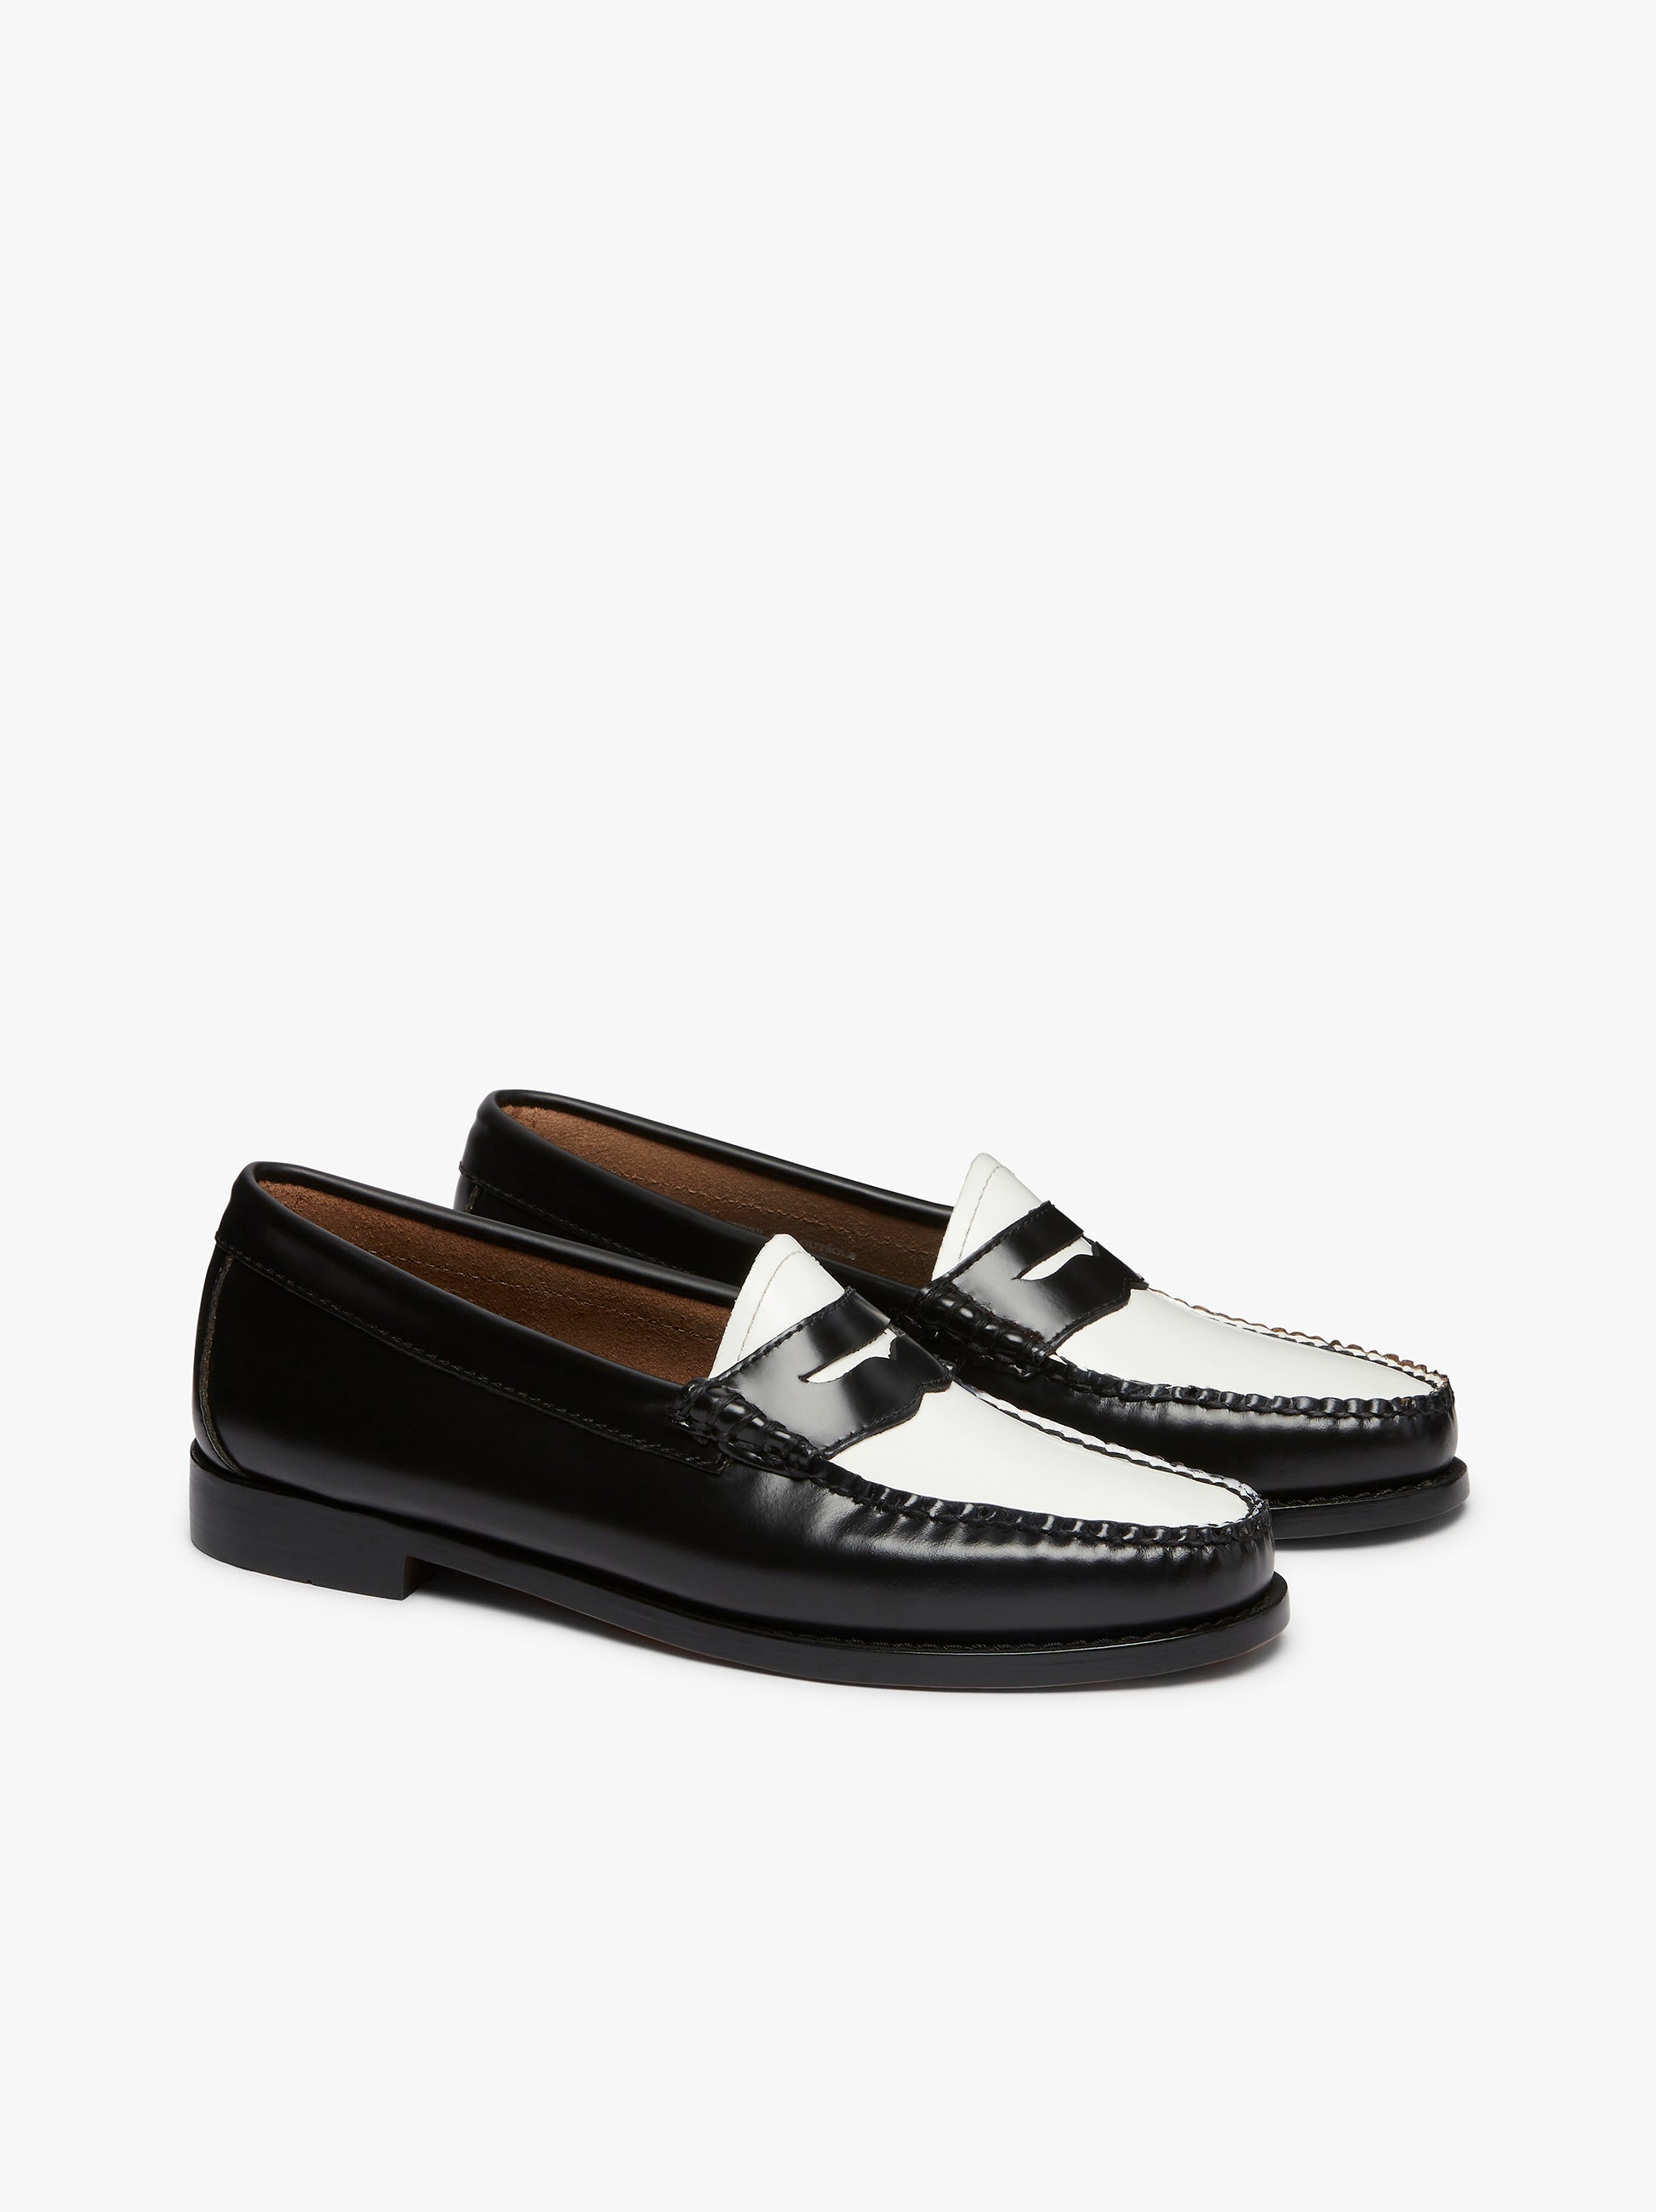 Black And White Penny Loafers Womens | Black And White Loafers